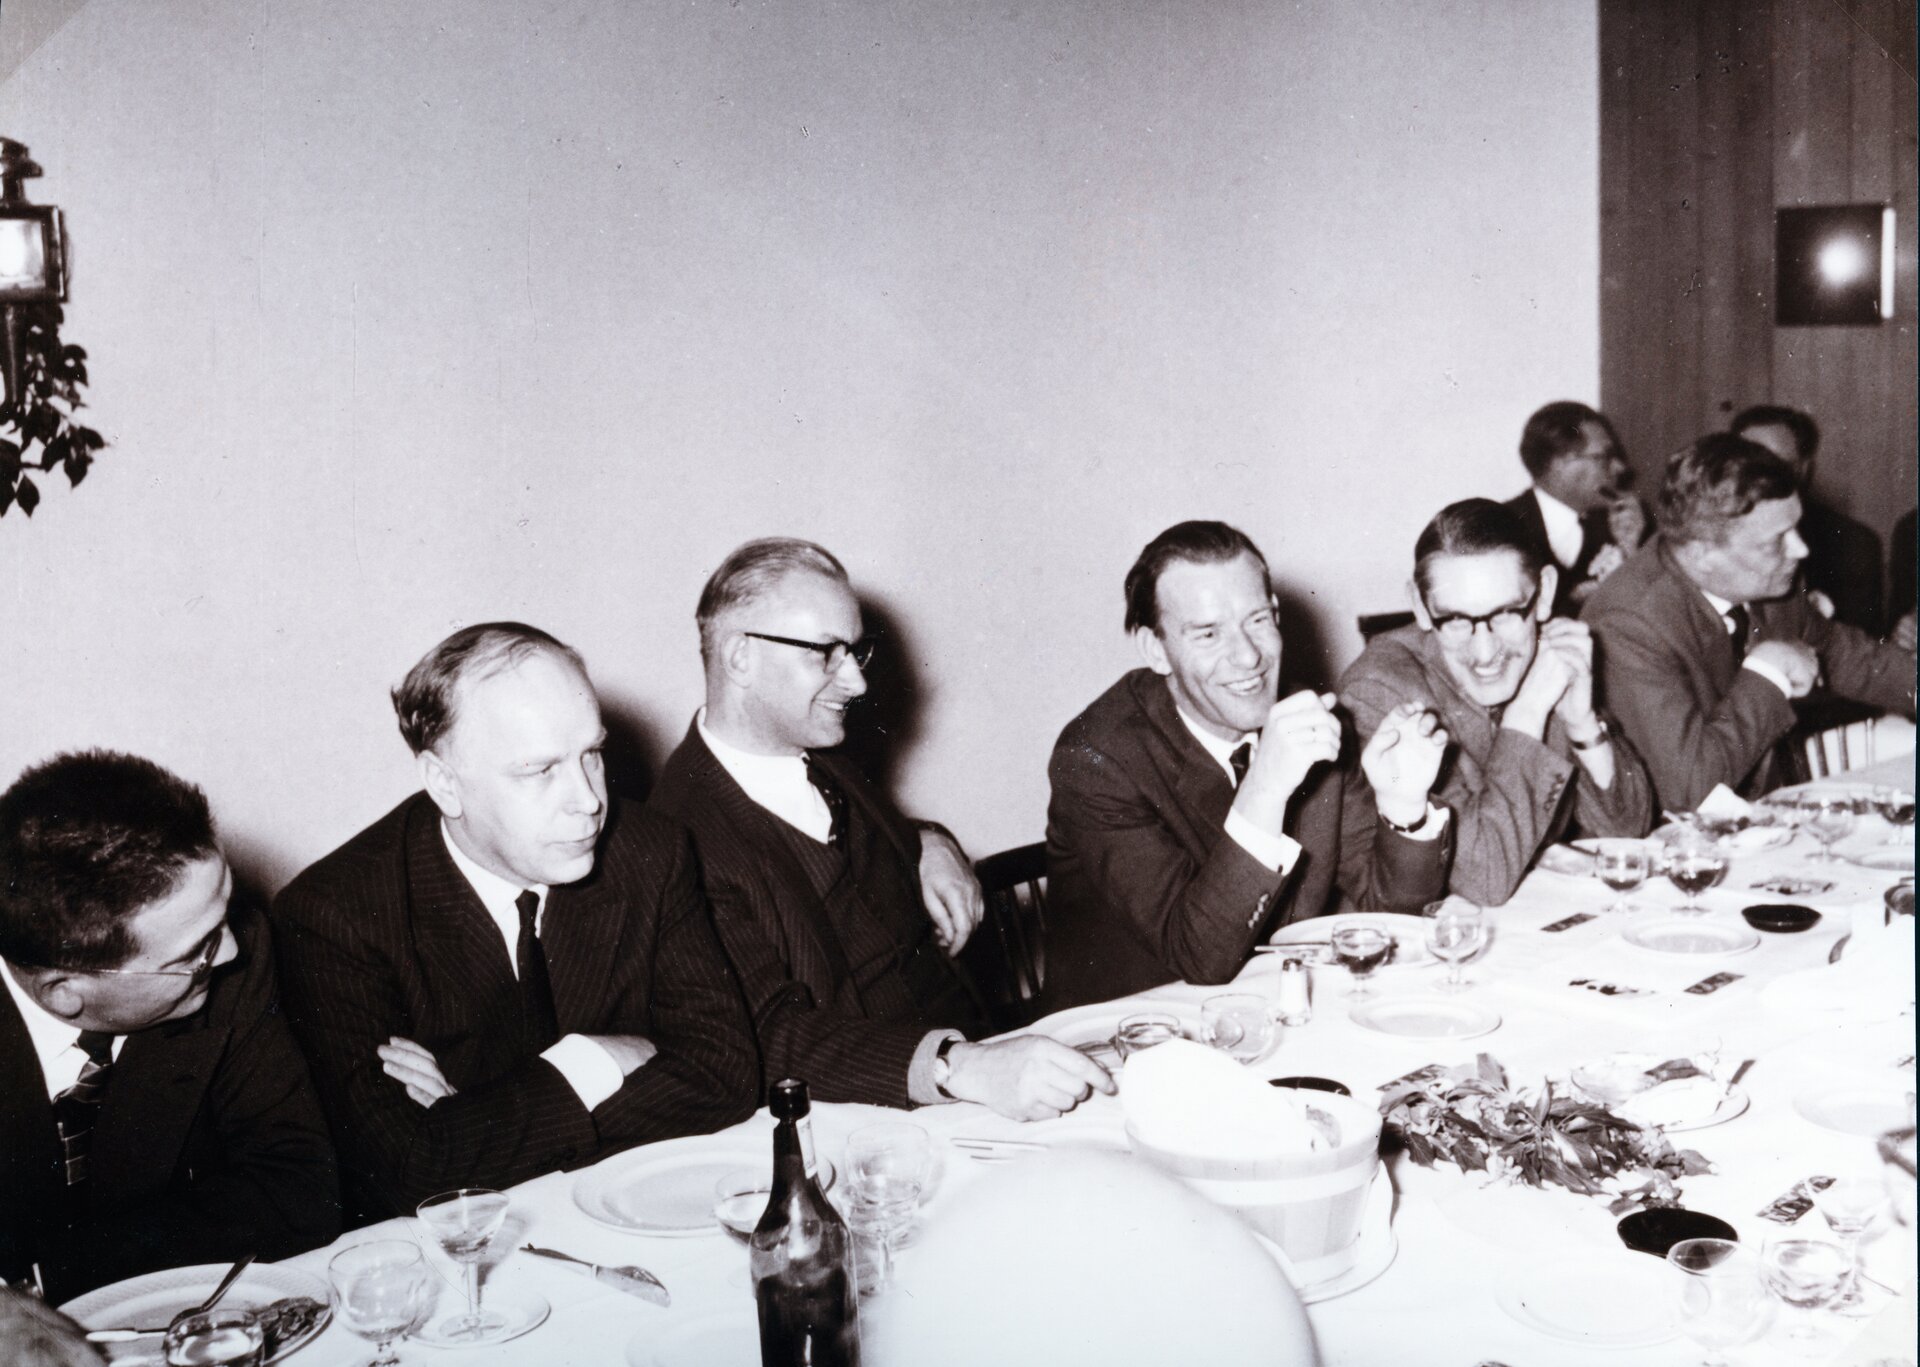 Scientific and Technical Working Group of the COPERS, Montana, Switzerland, 29/30 January 1963